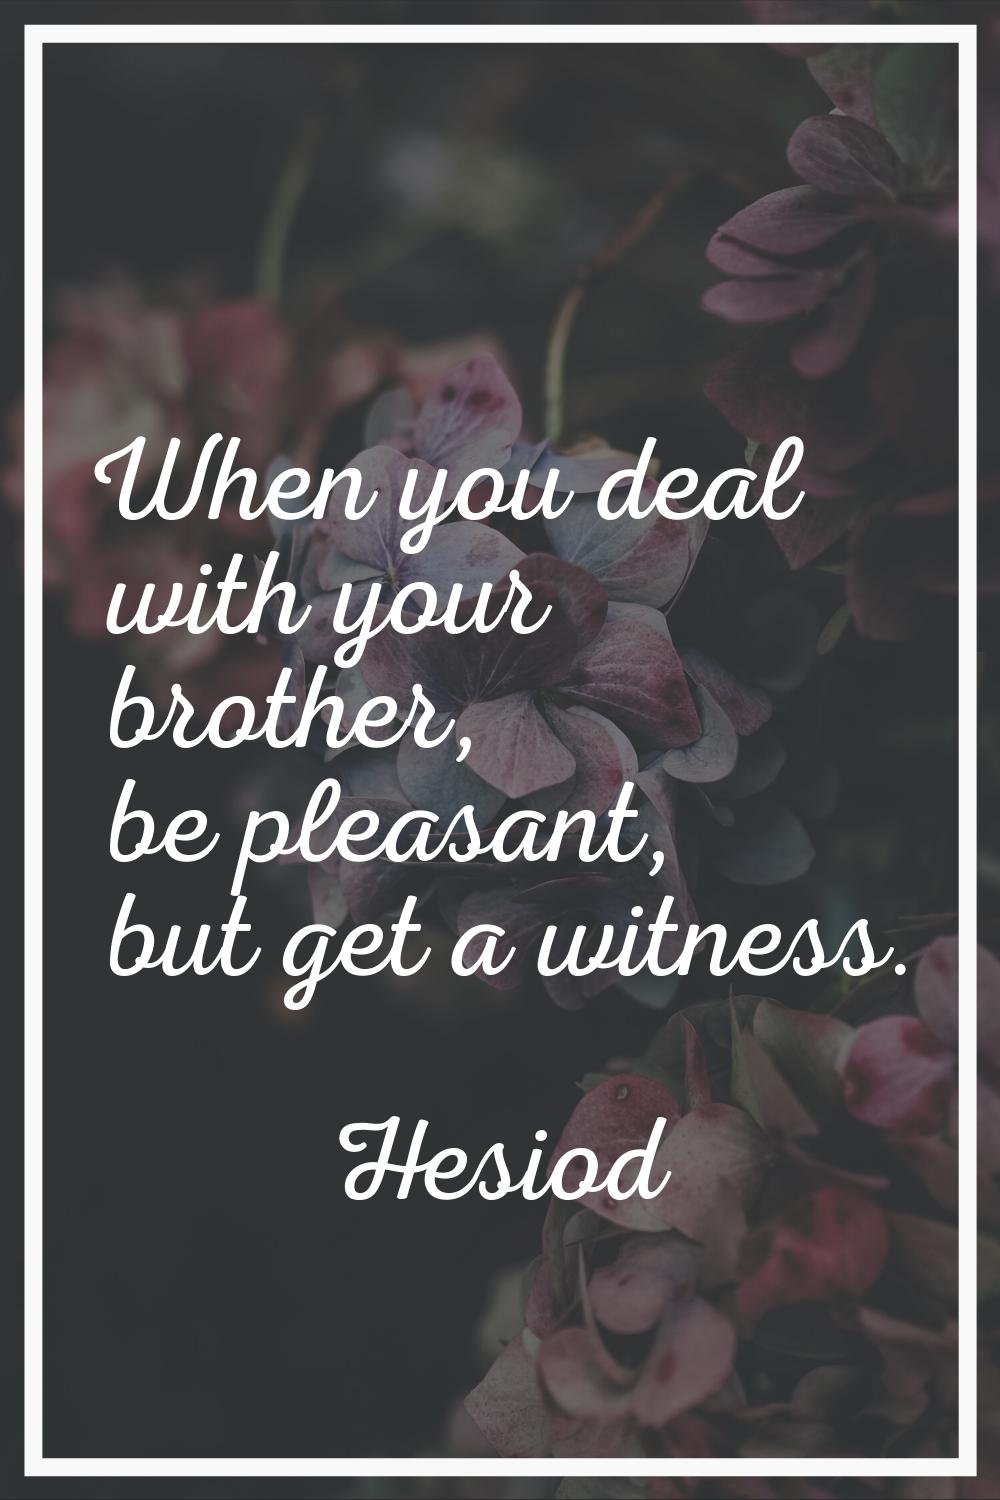 When you deal with your brother, be pleasant, but get a witness.